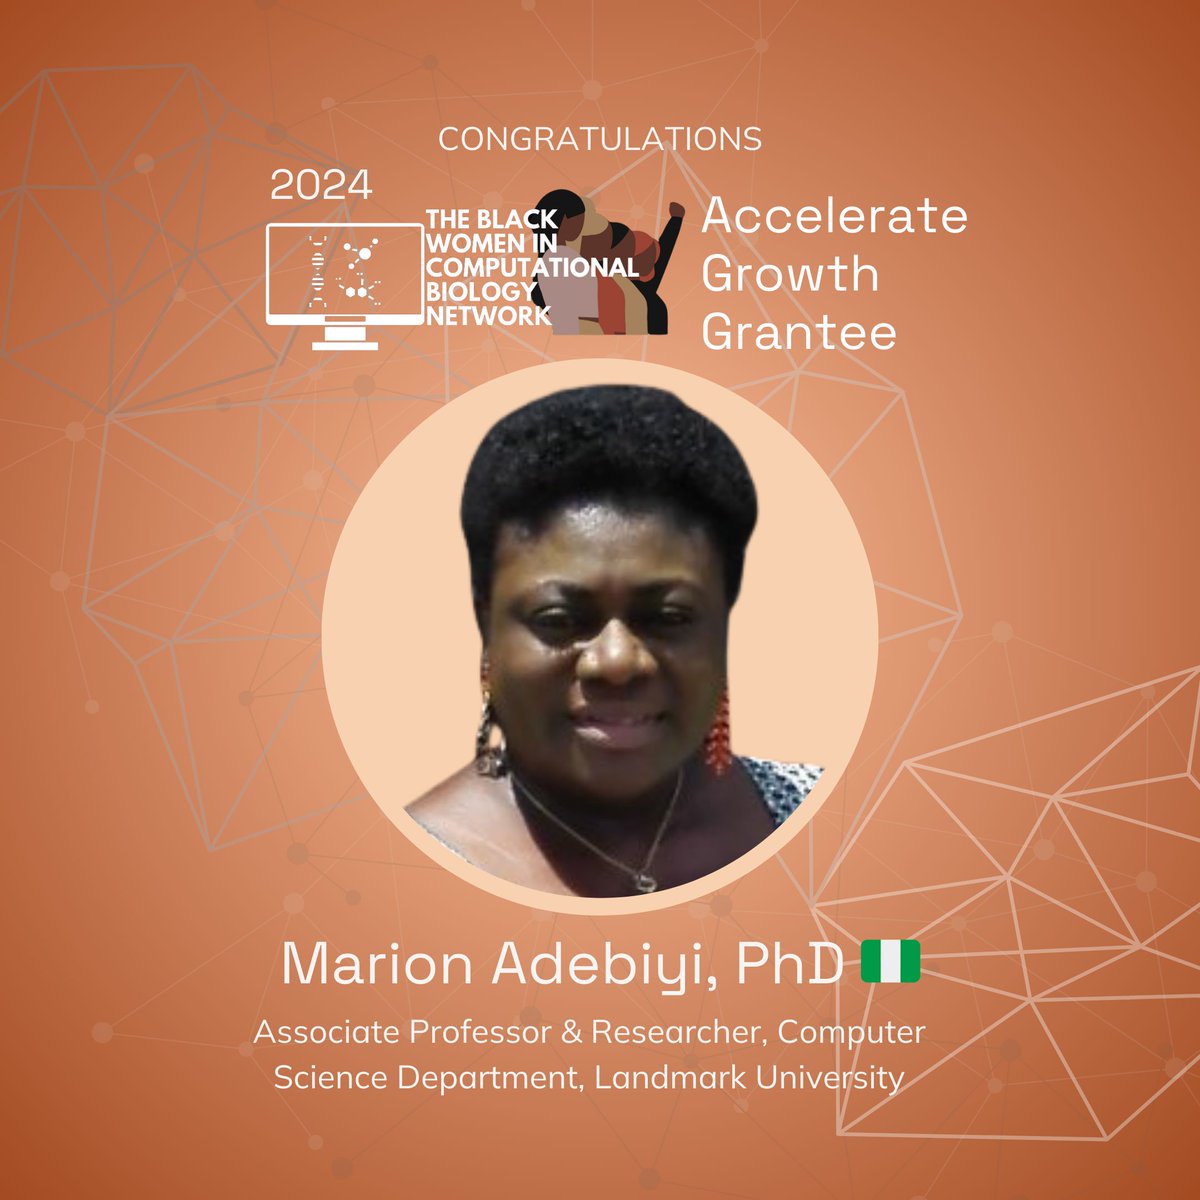 🌟MEET THE GRANTEES
Dr. Marion Adebiyi is an Associate Professor and Researcher in the Computer Science Department at Landmark University in Nigeria. She has been granted the Accelerate Growth grant to partake in a CompBio-related upskilling or career-boosting opportunity.